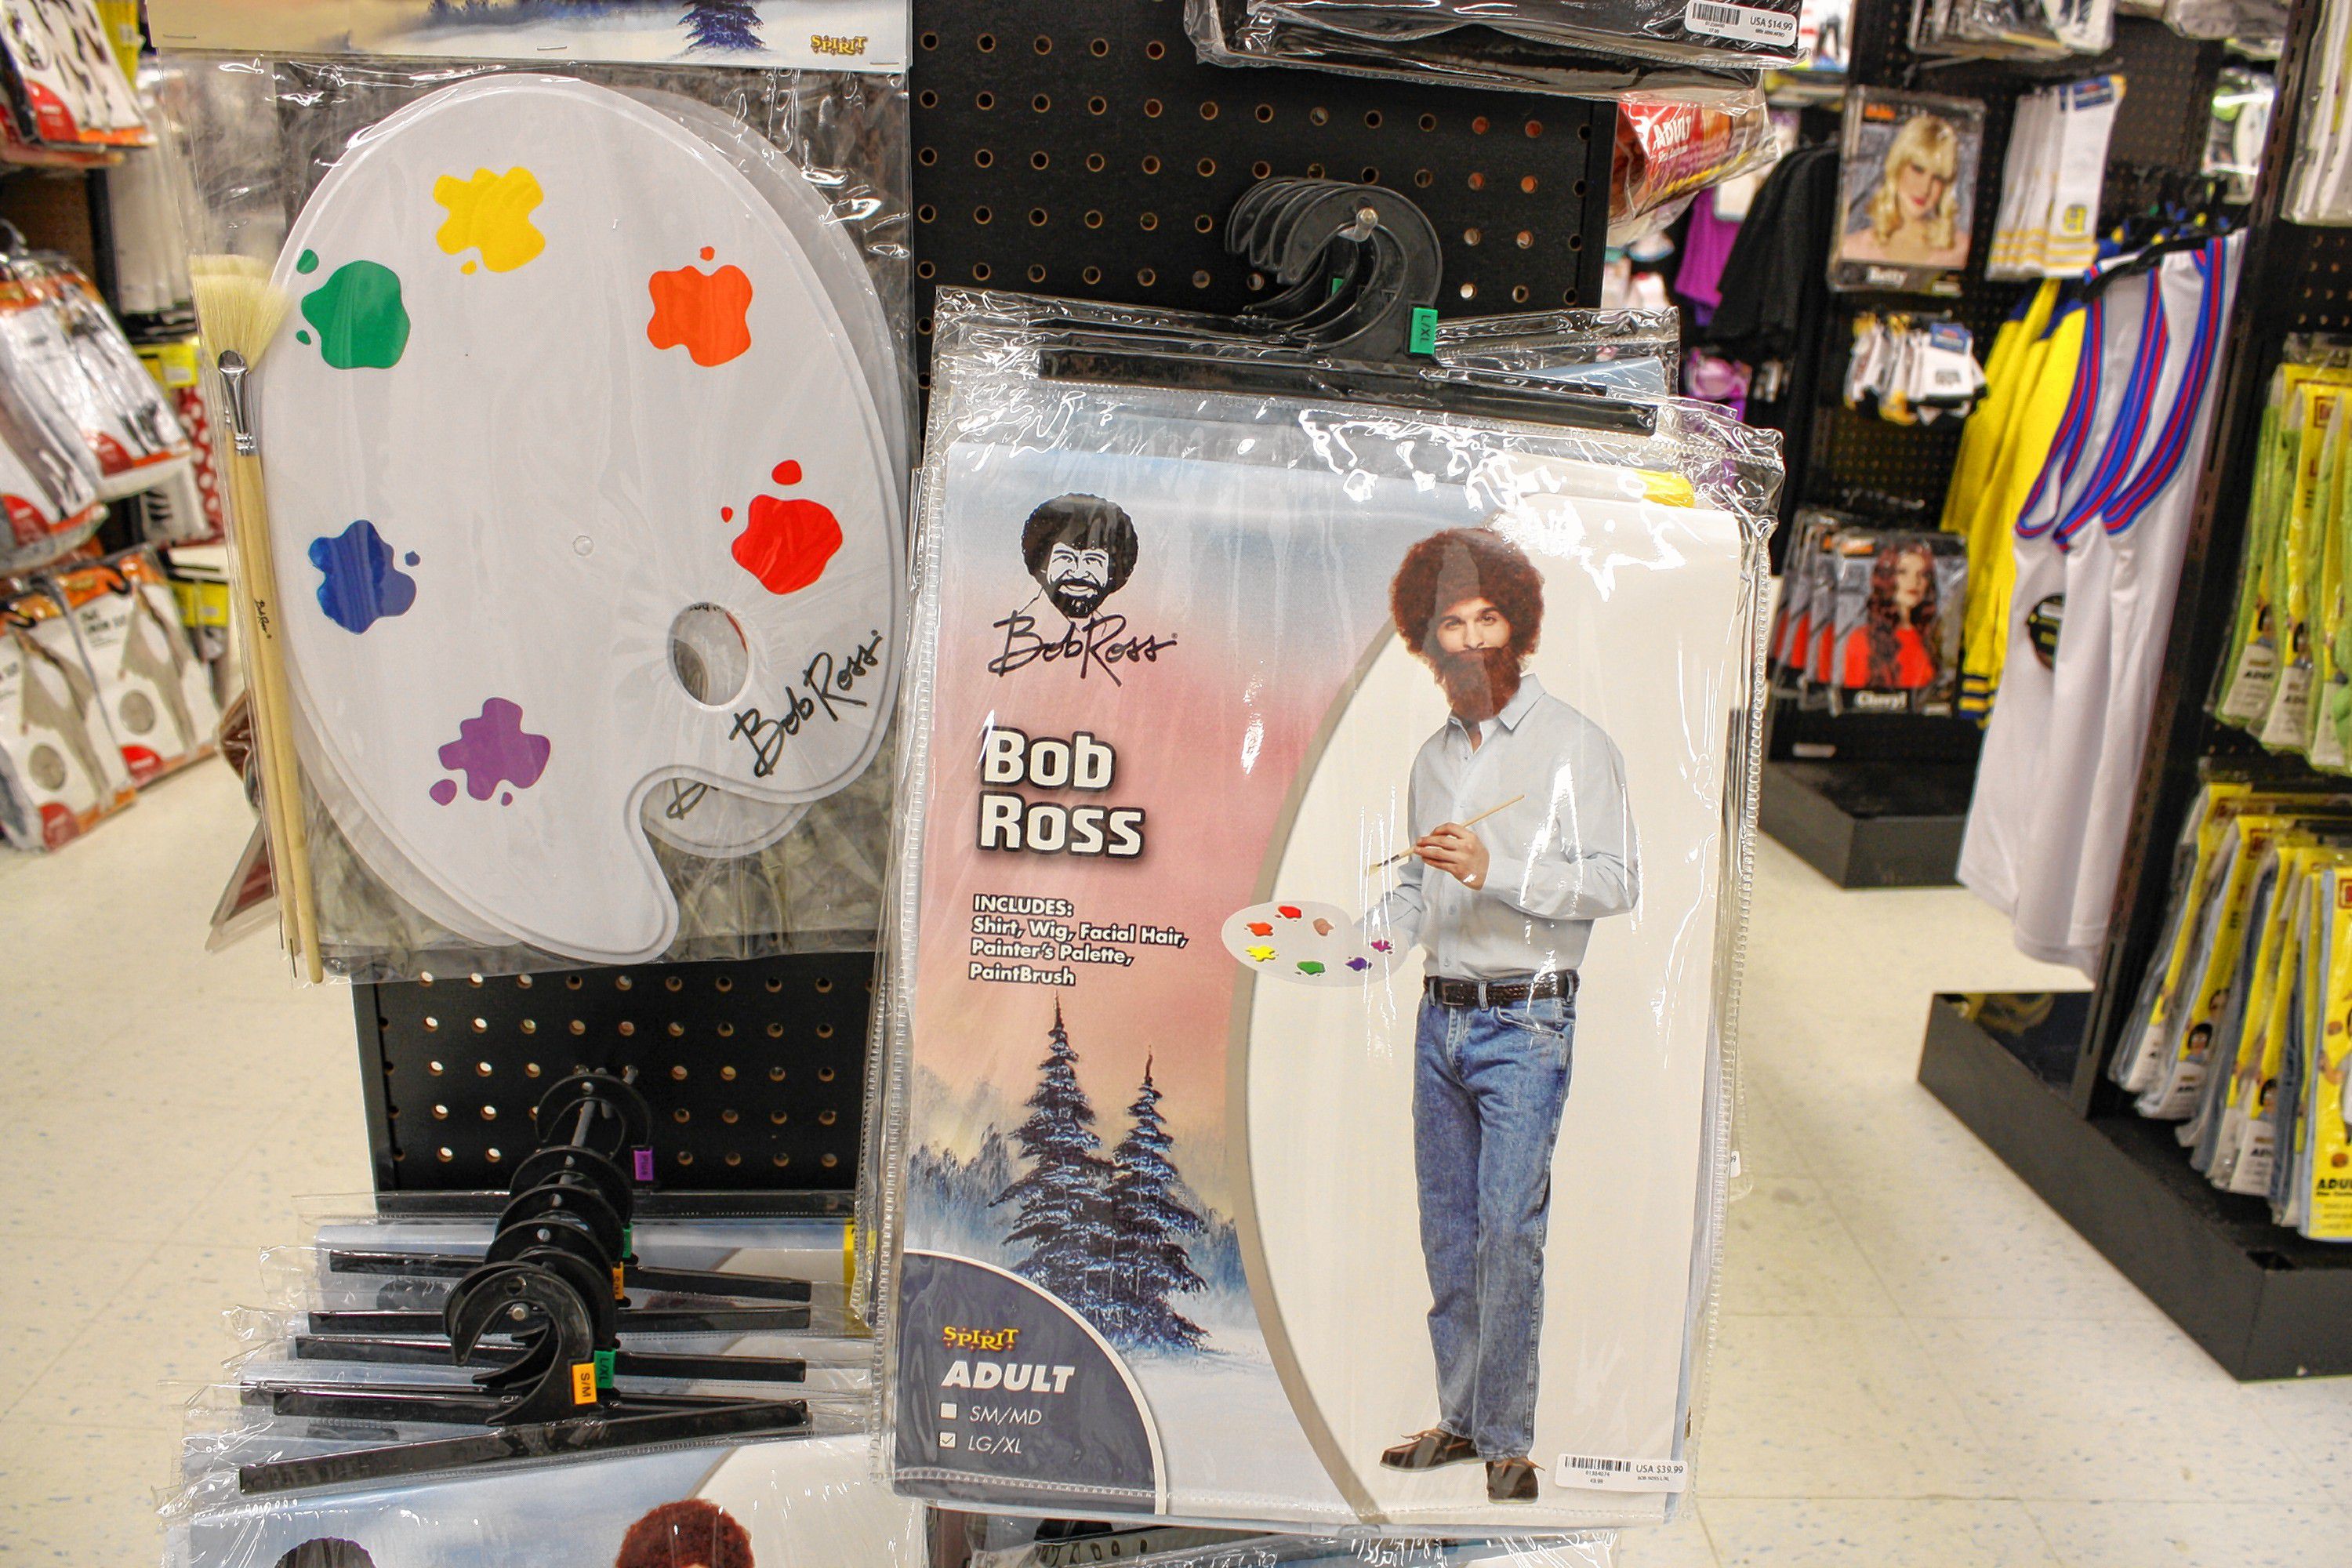 Perhaps the best throwback/obscure reference costume in stock at Spirit Halloween was this Bob Ross kit. You can get the outfit and wig in one package and the essential palette accessory separately.  JON BODELL / Insider staff